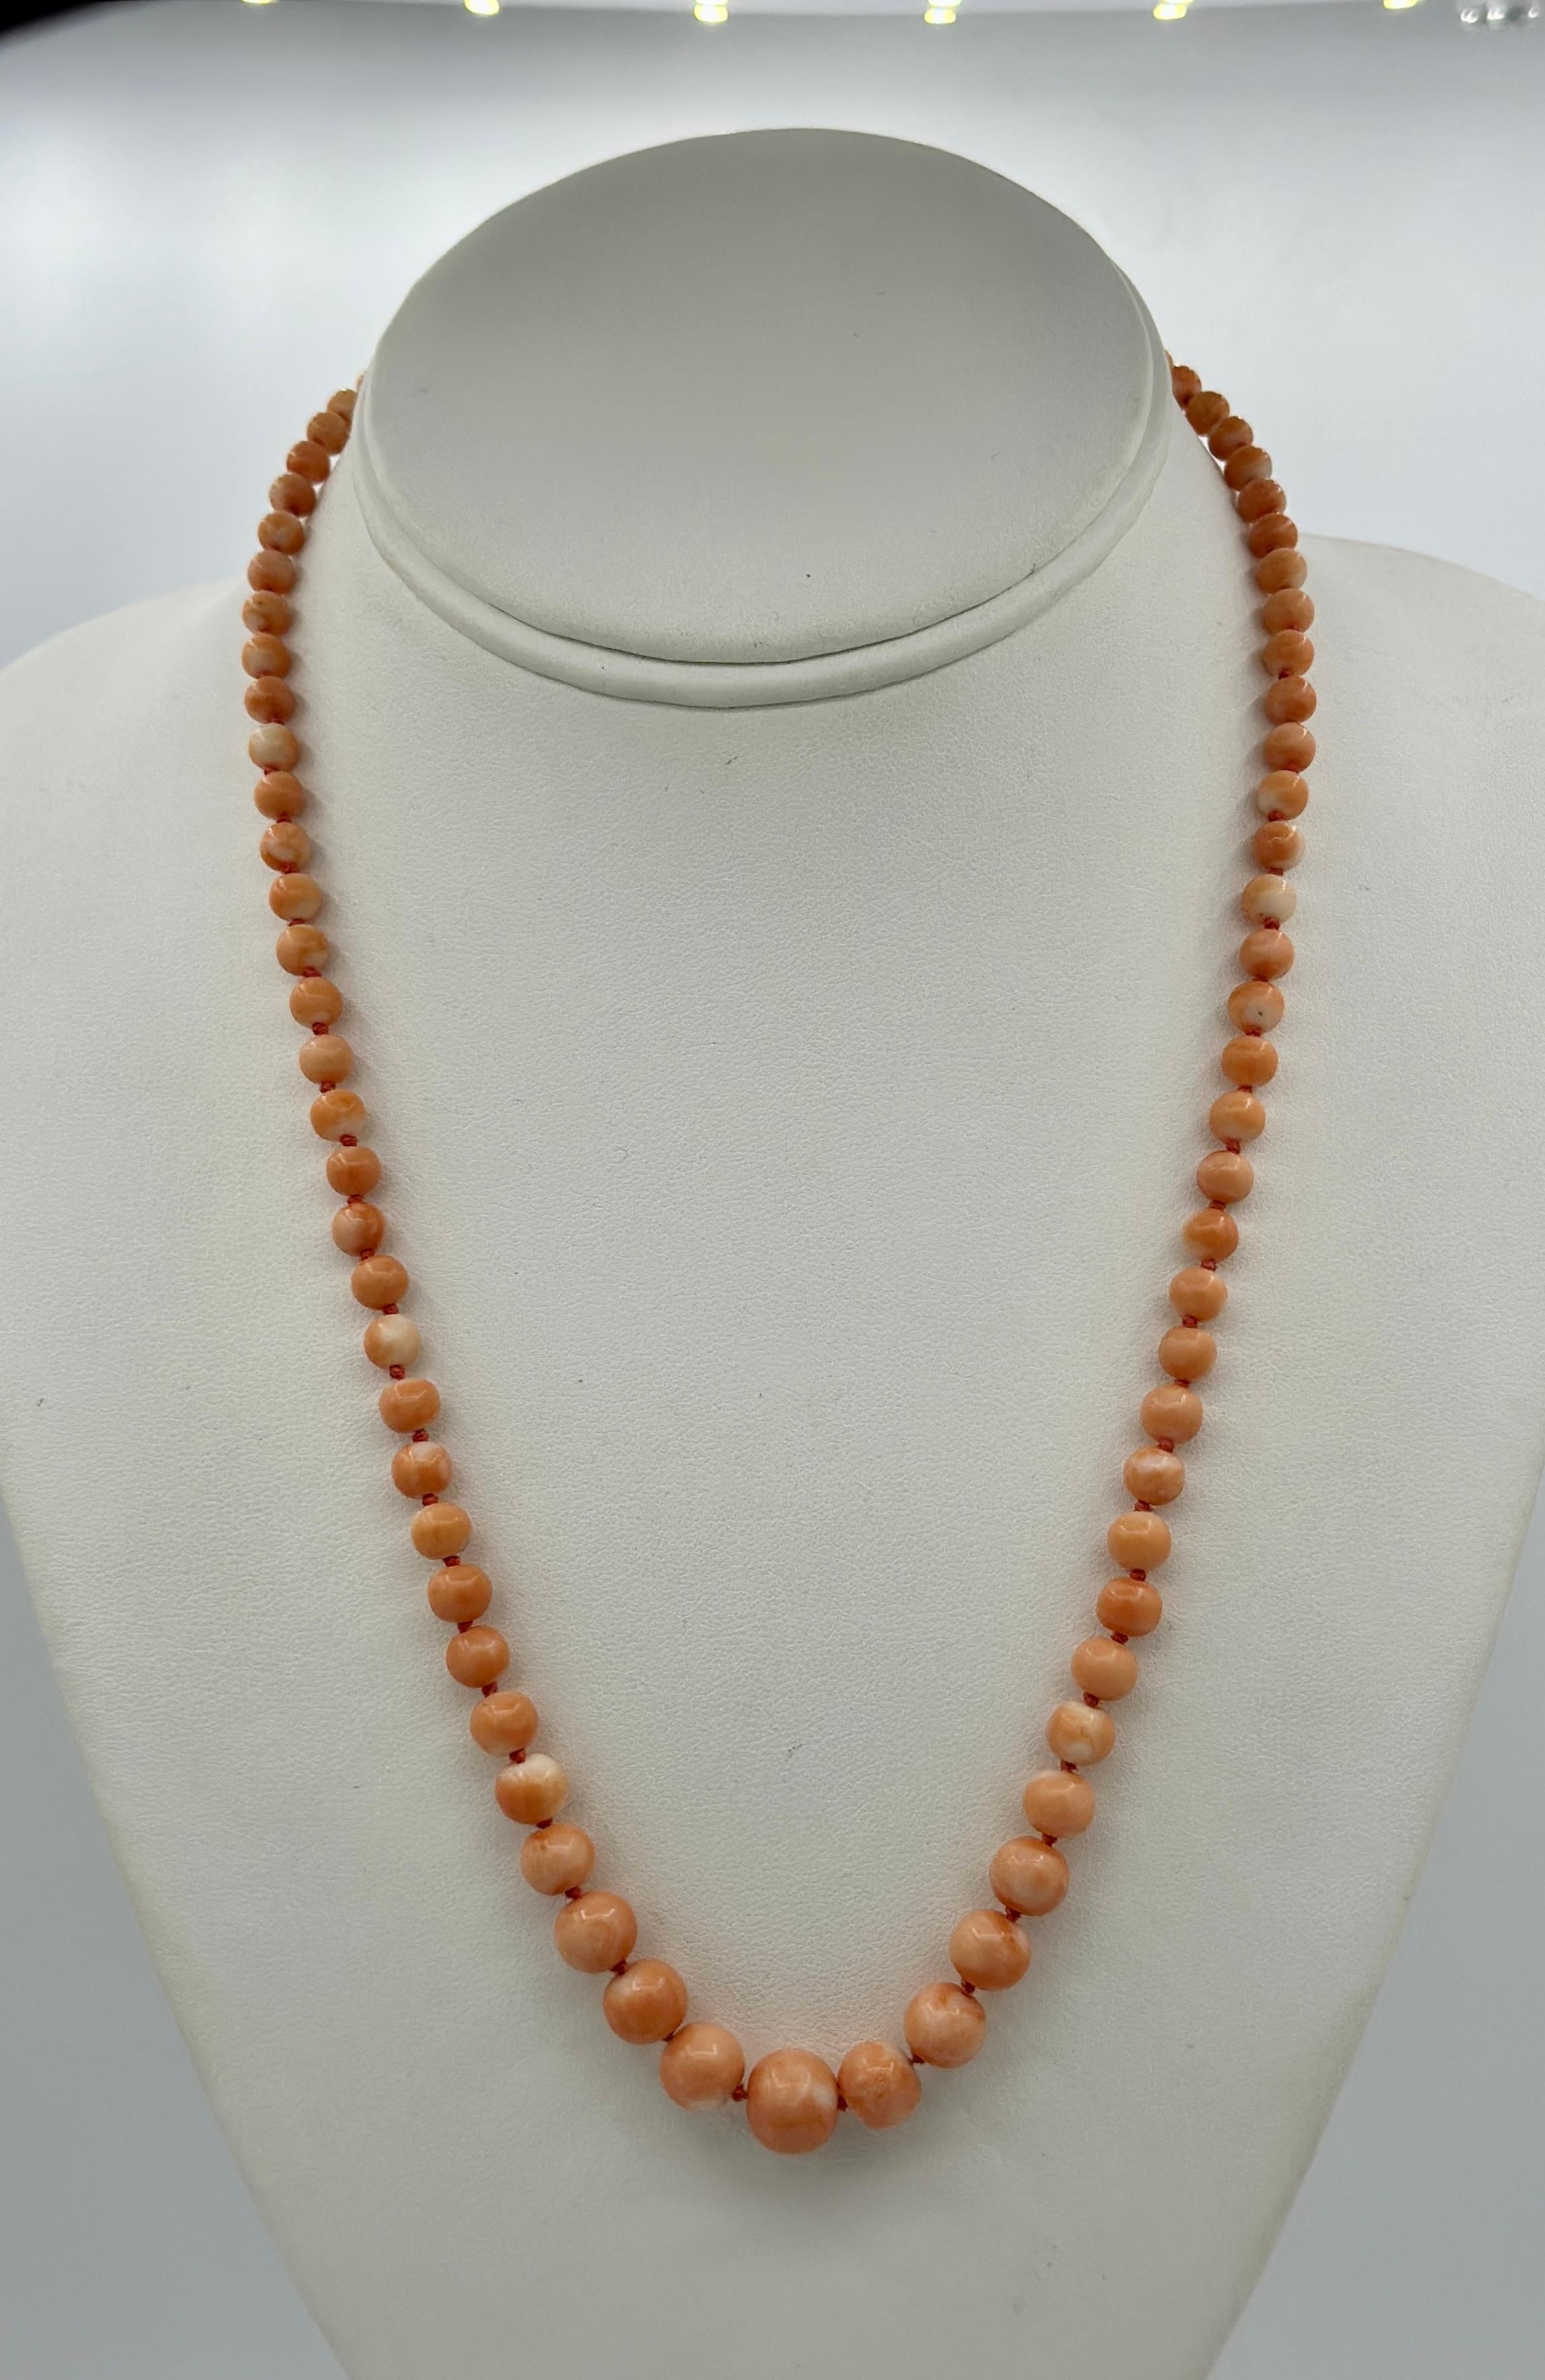 Women's or Men's Victorian Coral Gold Necklace 20 Inches Graduated Coral Beads 5 - 10mm For Sale